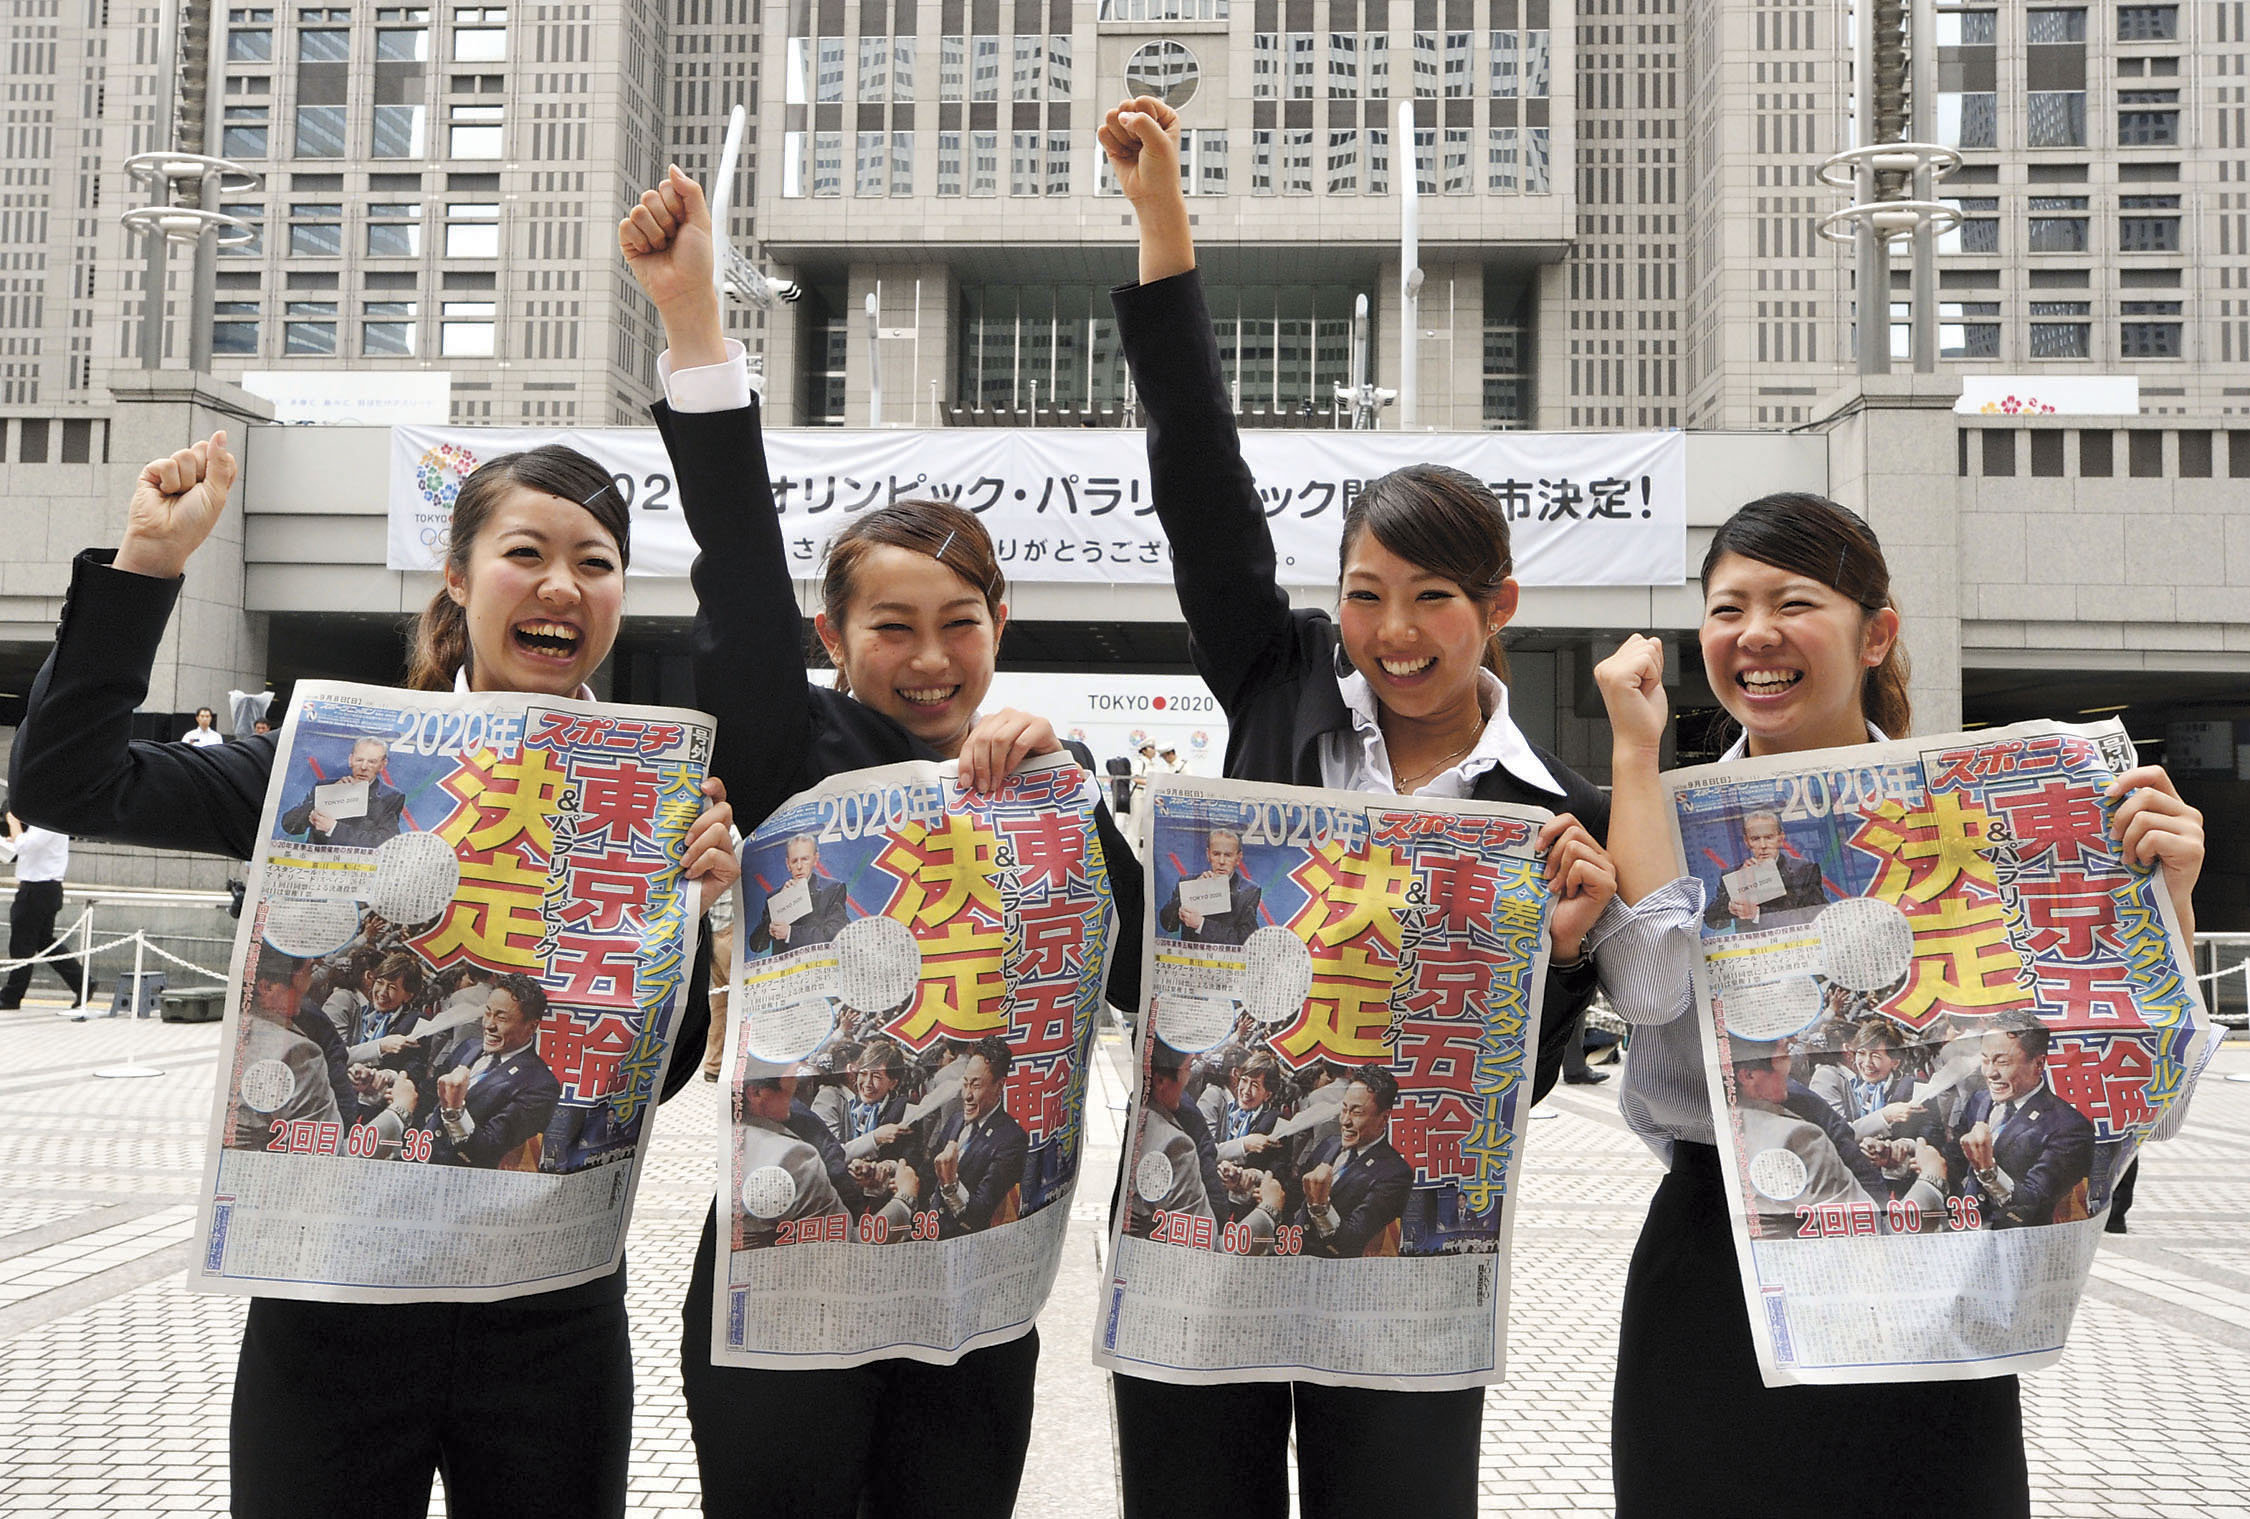 Four cheers: Government workers hold up copies of a newspaper announcing the decision in 2013 to award the 2020 Olympics to Tokyo. Japan's four main newspapers have announced they will be official sponsors for the games, but other publications believe this could affect objective reporting of the event. | YOSHIAKI MIURA